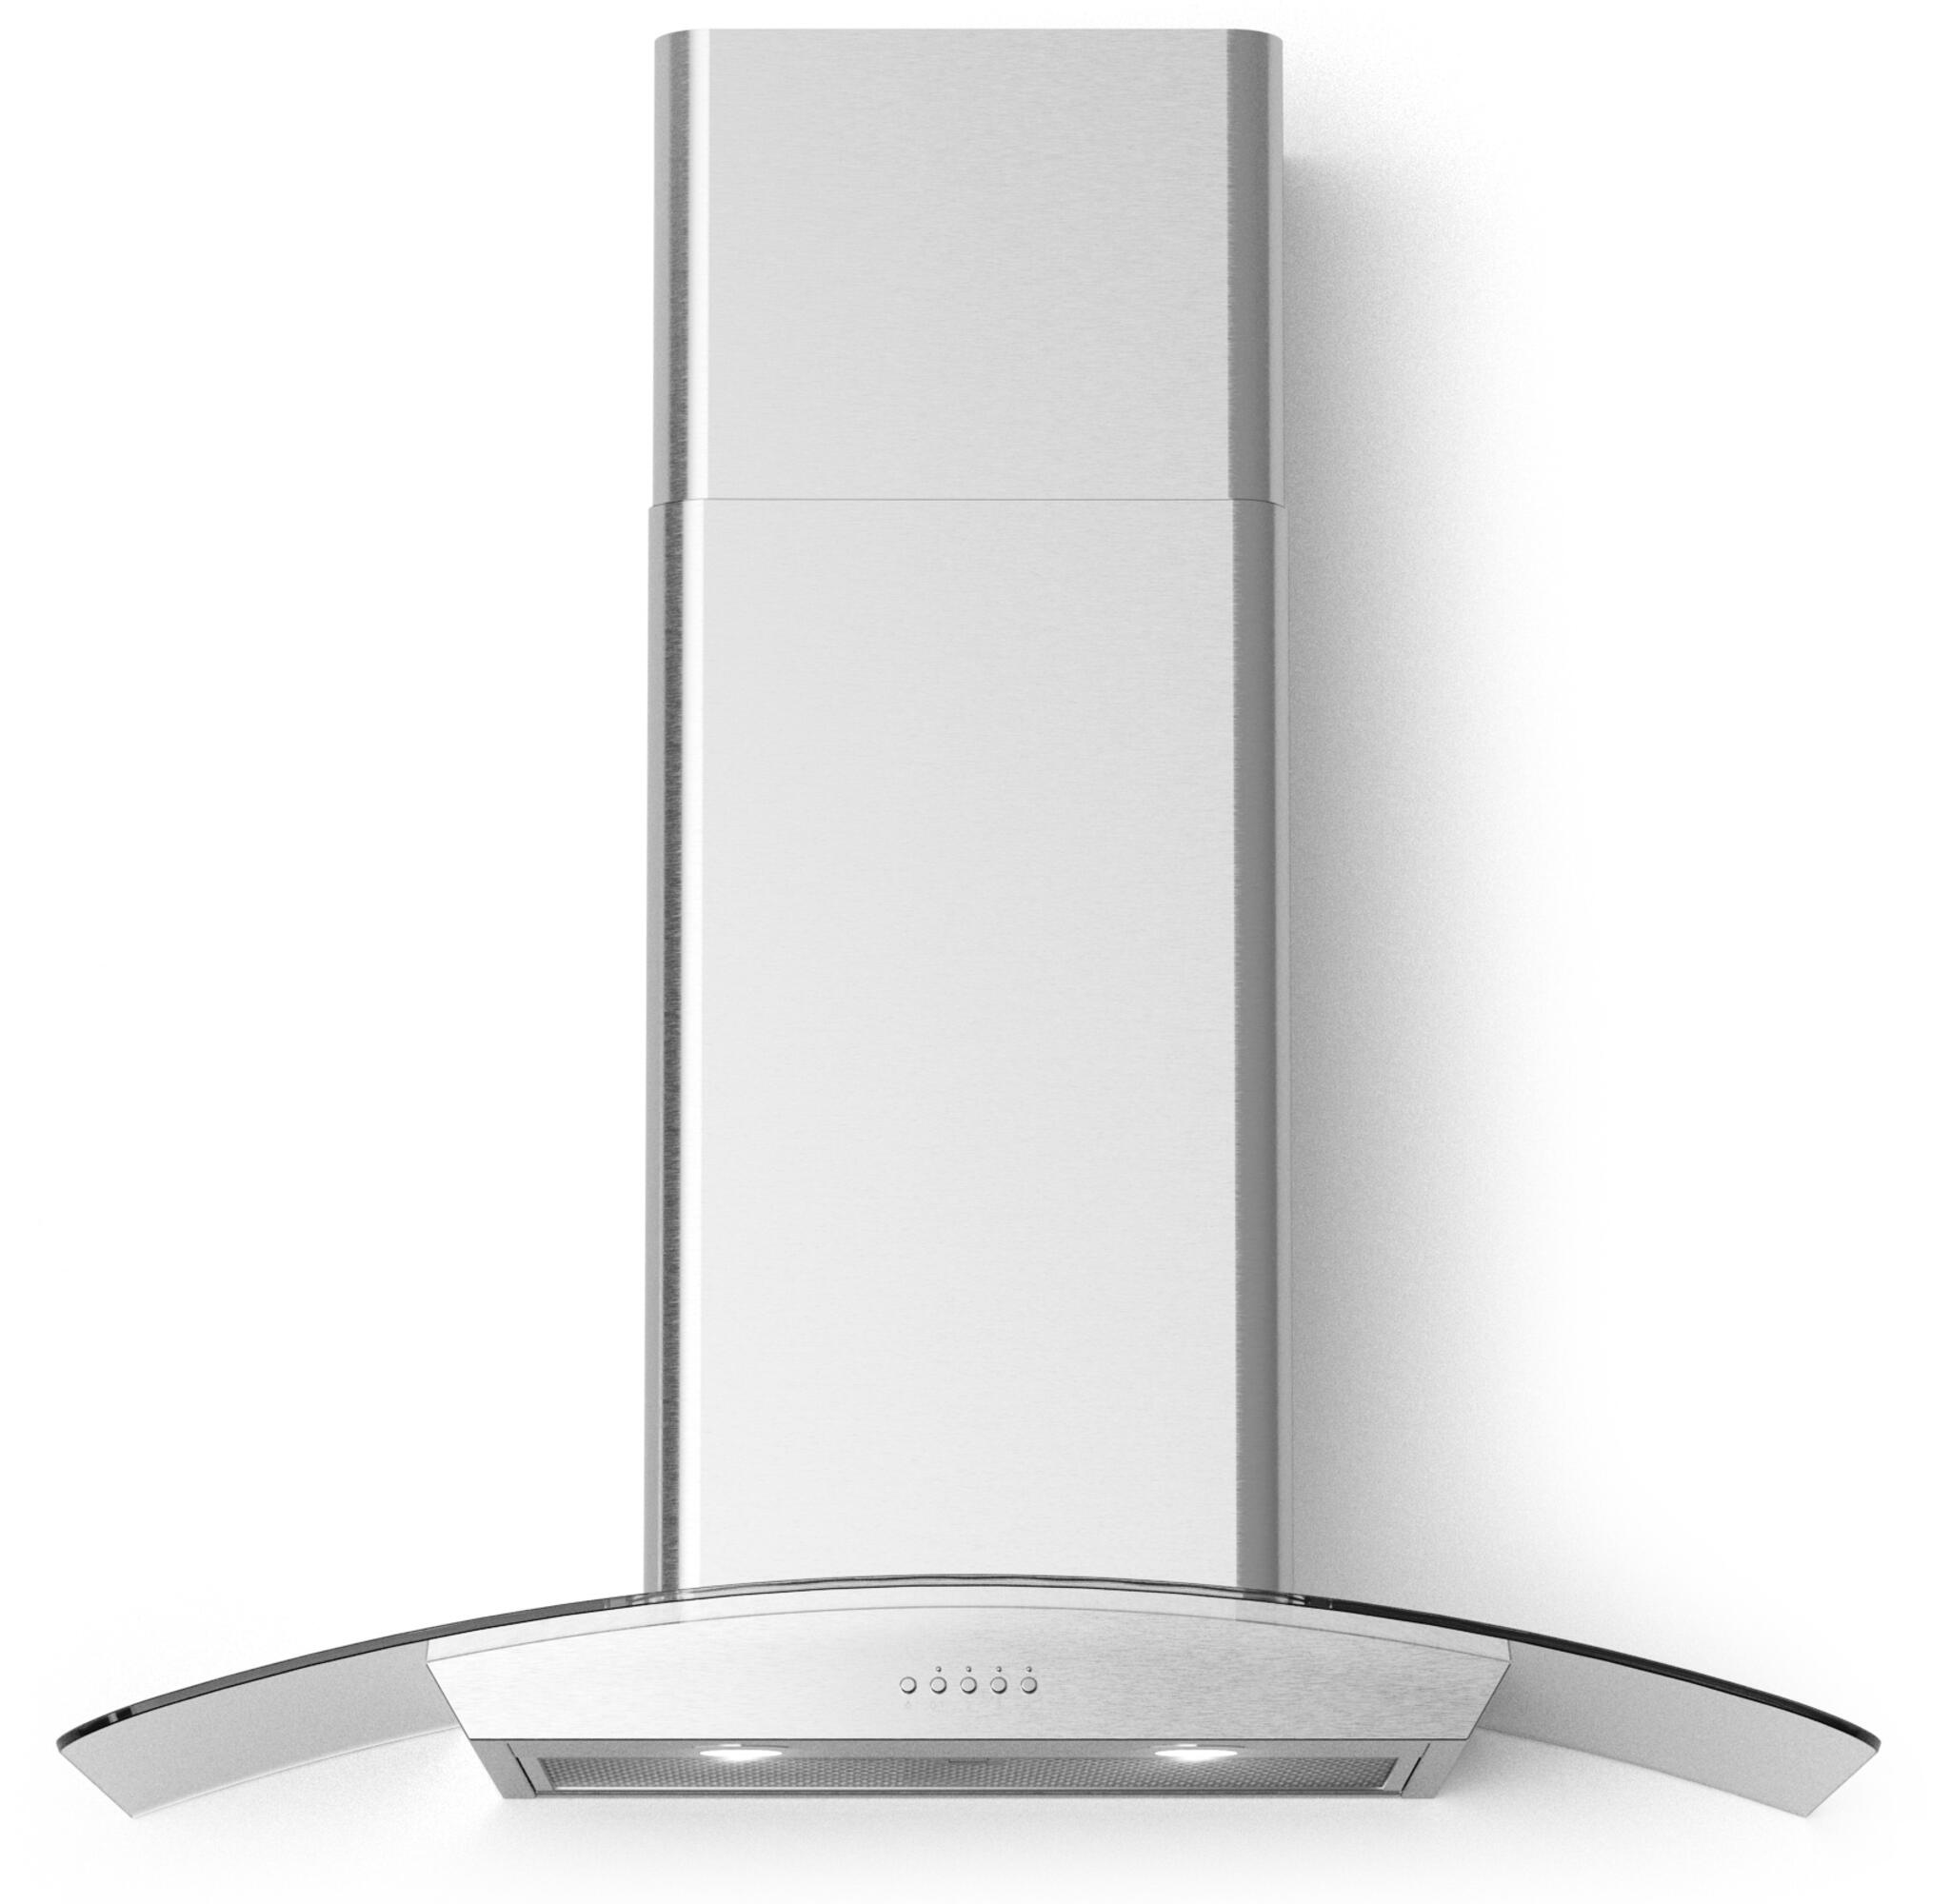 Forté Cortivo Wall Mount Glass Canopy Range Hood with 600 CFM in Stainless Steel